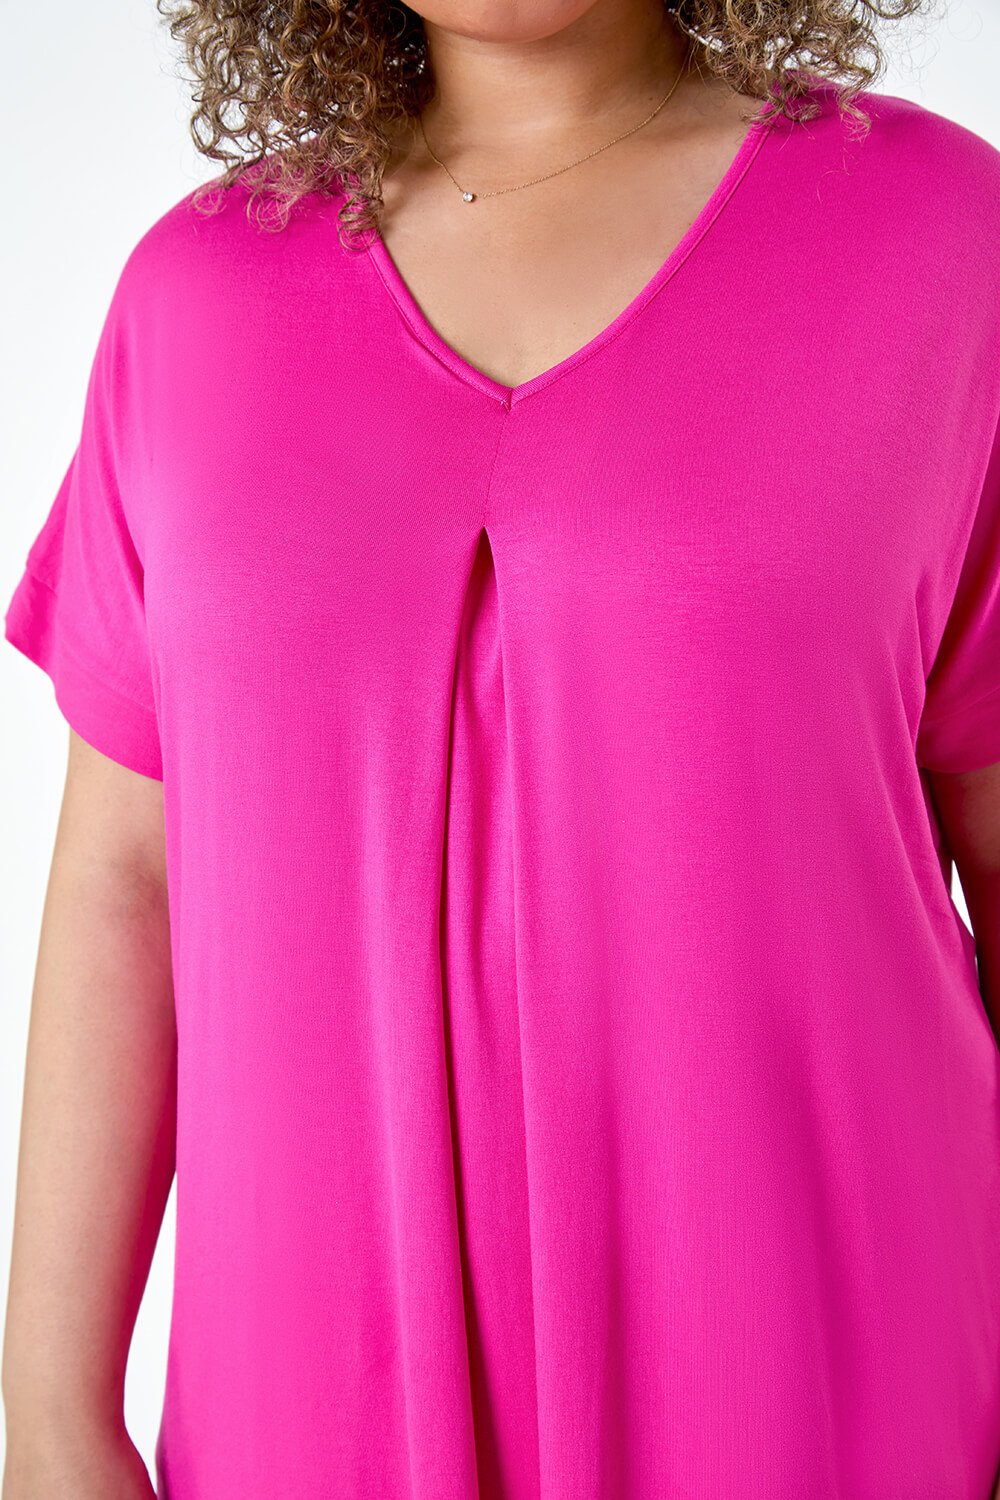 PINK Curve Plain Pleat Front Stretch Top, Image 5 of 5